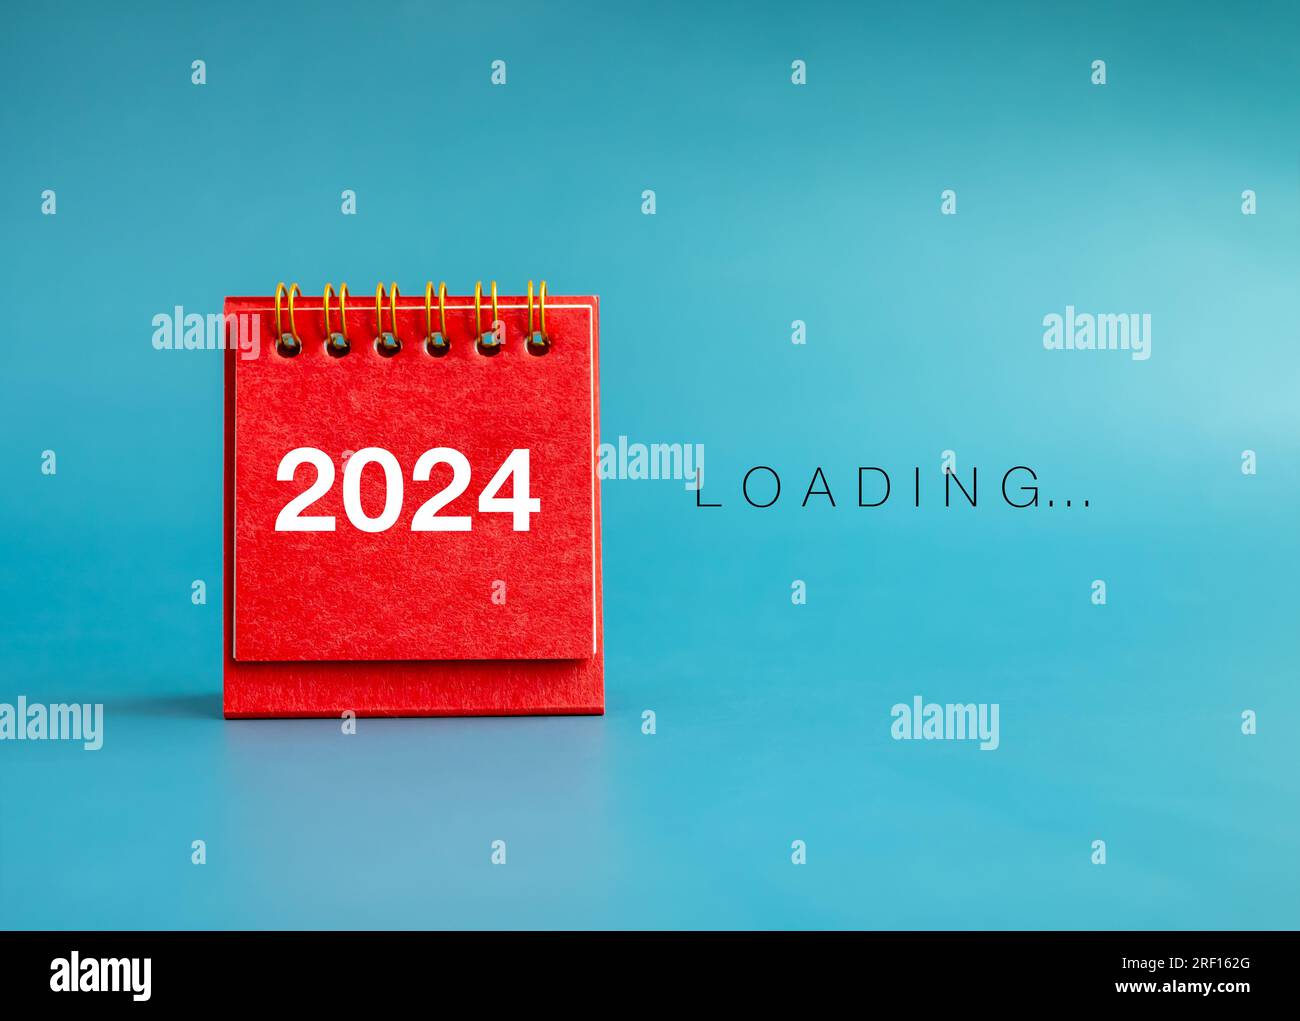 Loading to Merry christmas and happy new year 2024 banner background. Loading, text appears beside small red desk calendar with 2024, white year numbe Stock Photo